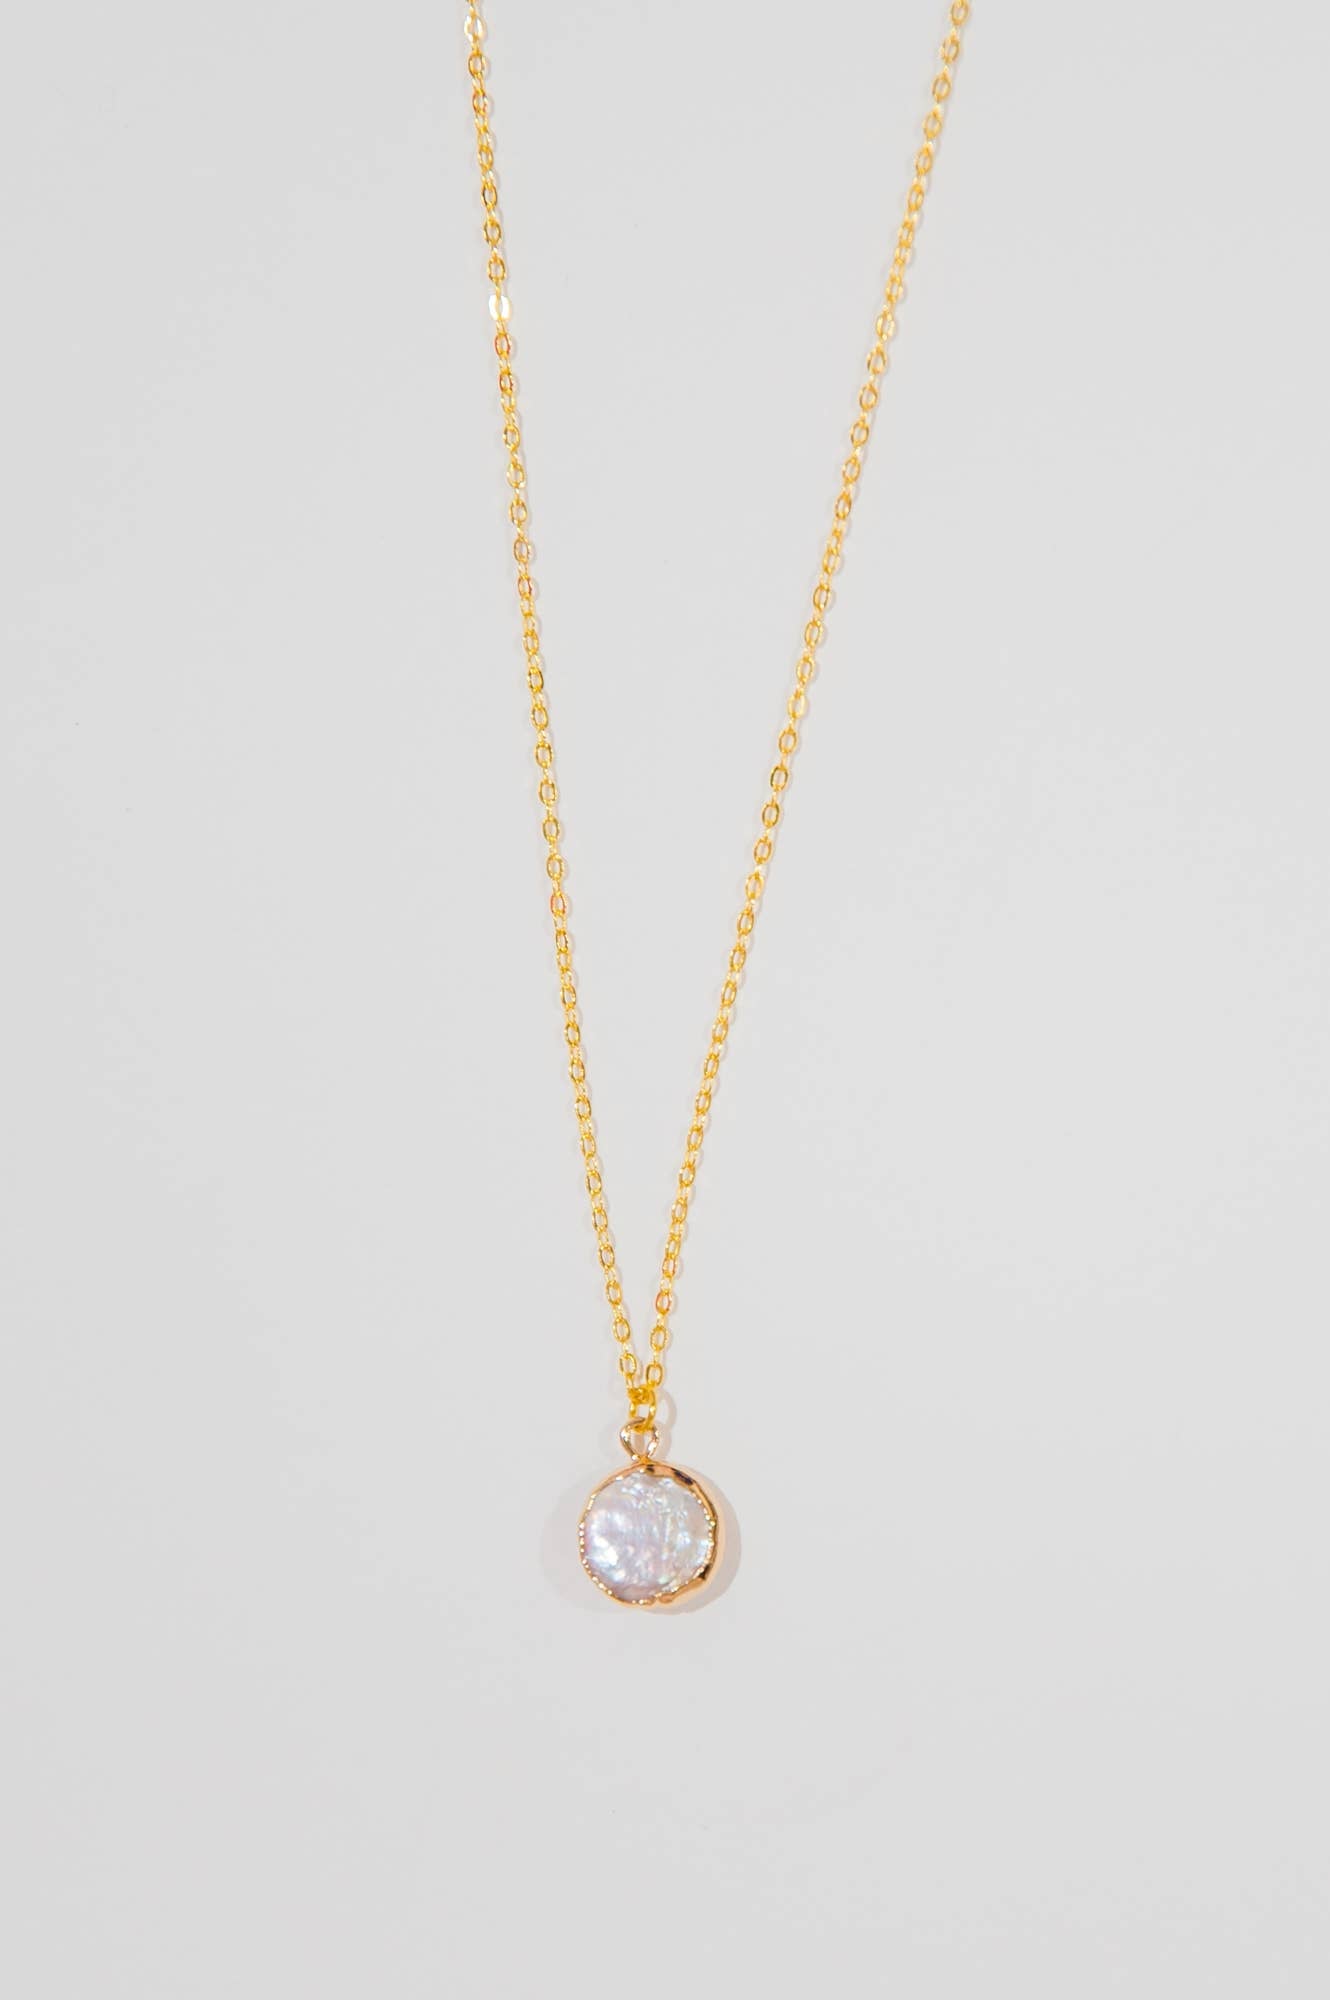 Pearl Pendant Necklace  Designed For Joy   -better made easy-eco-friendly-sustainable-gifting